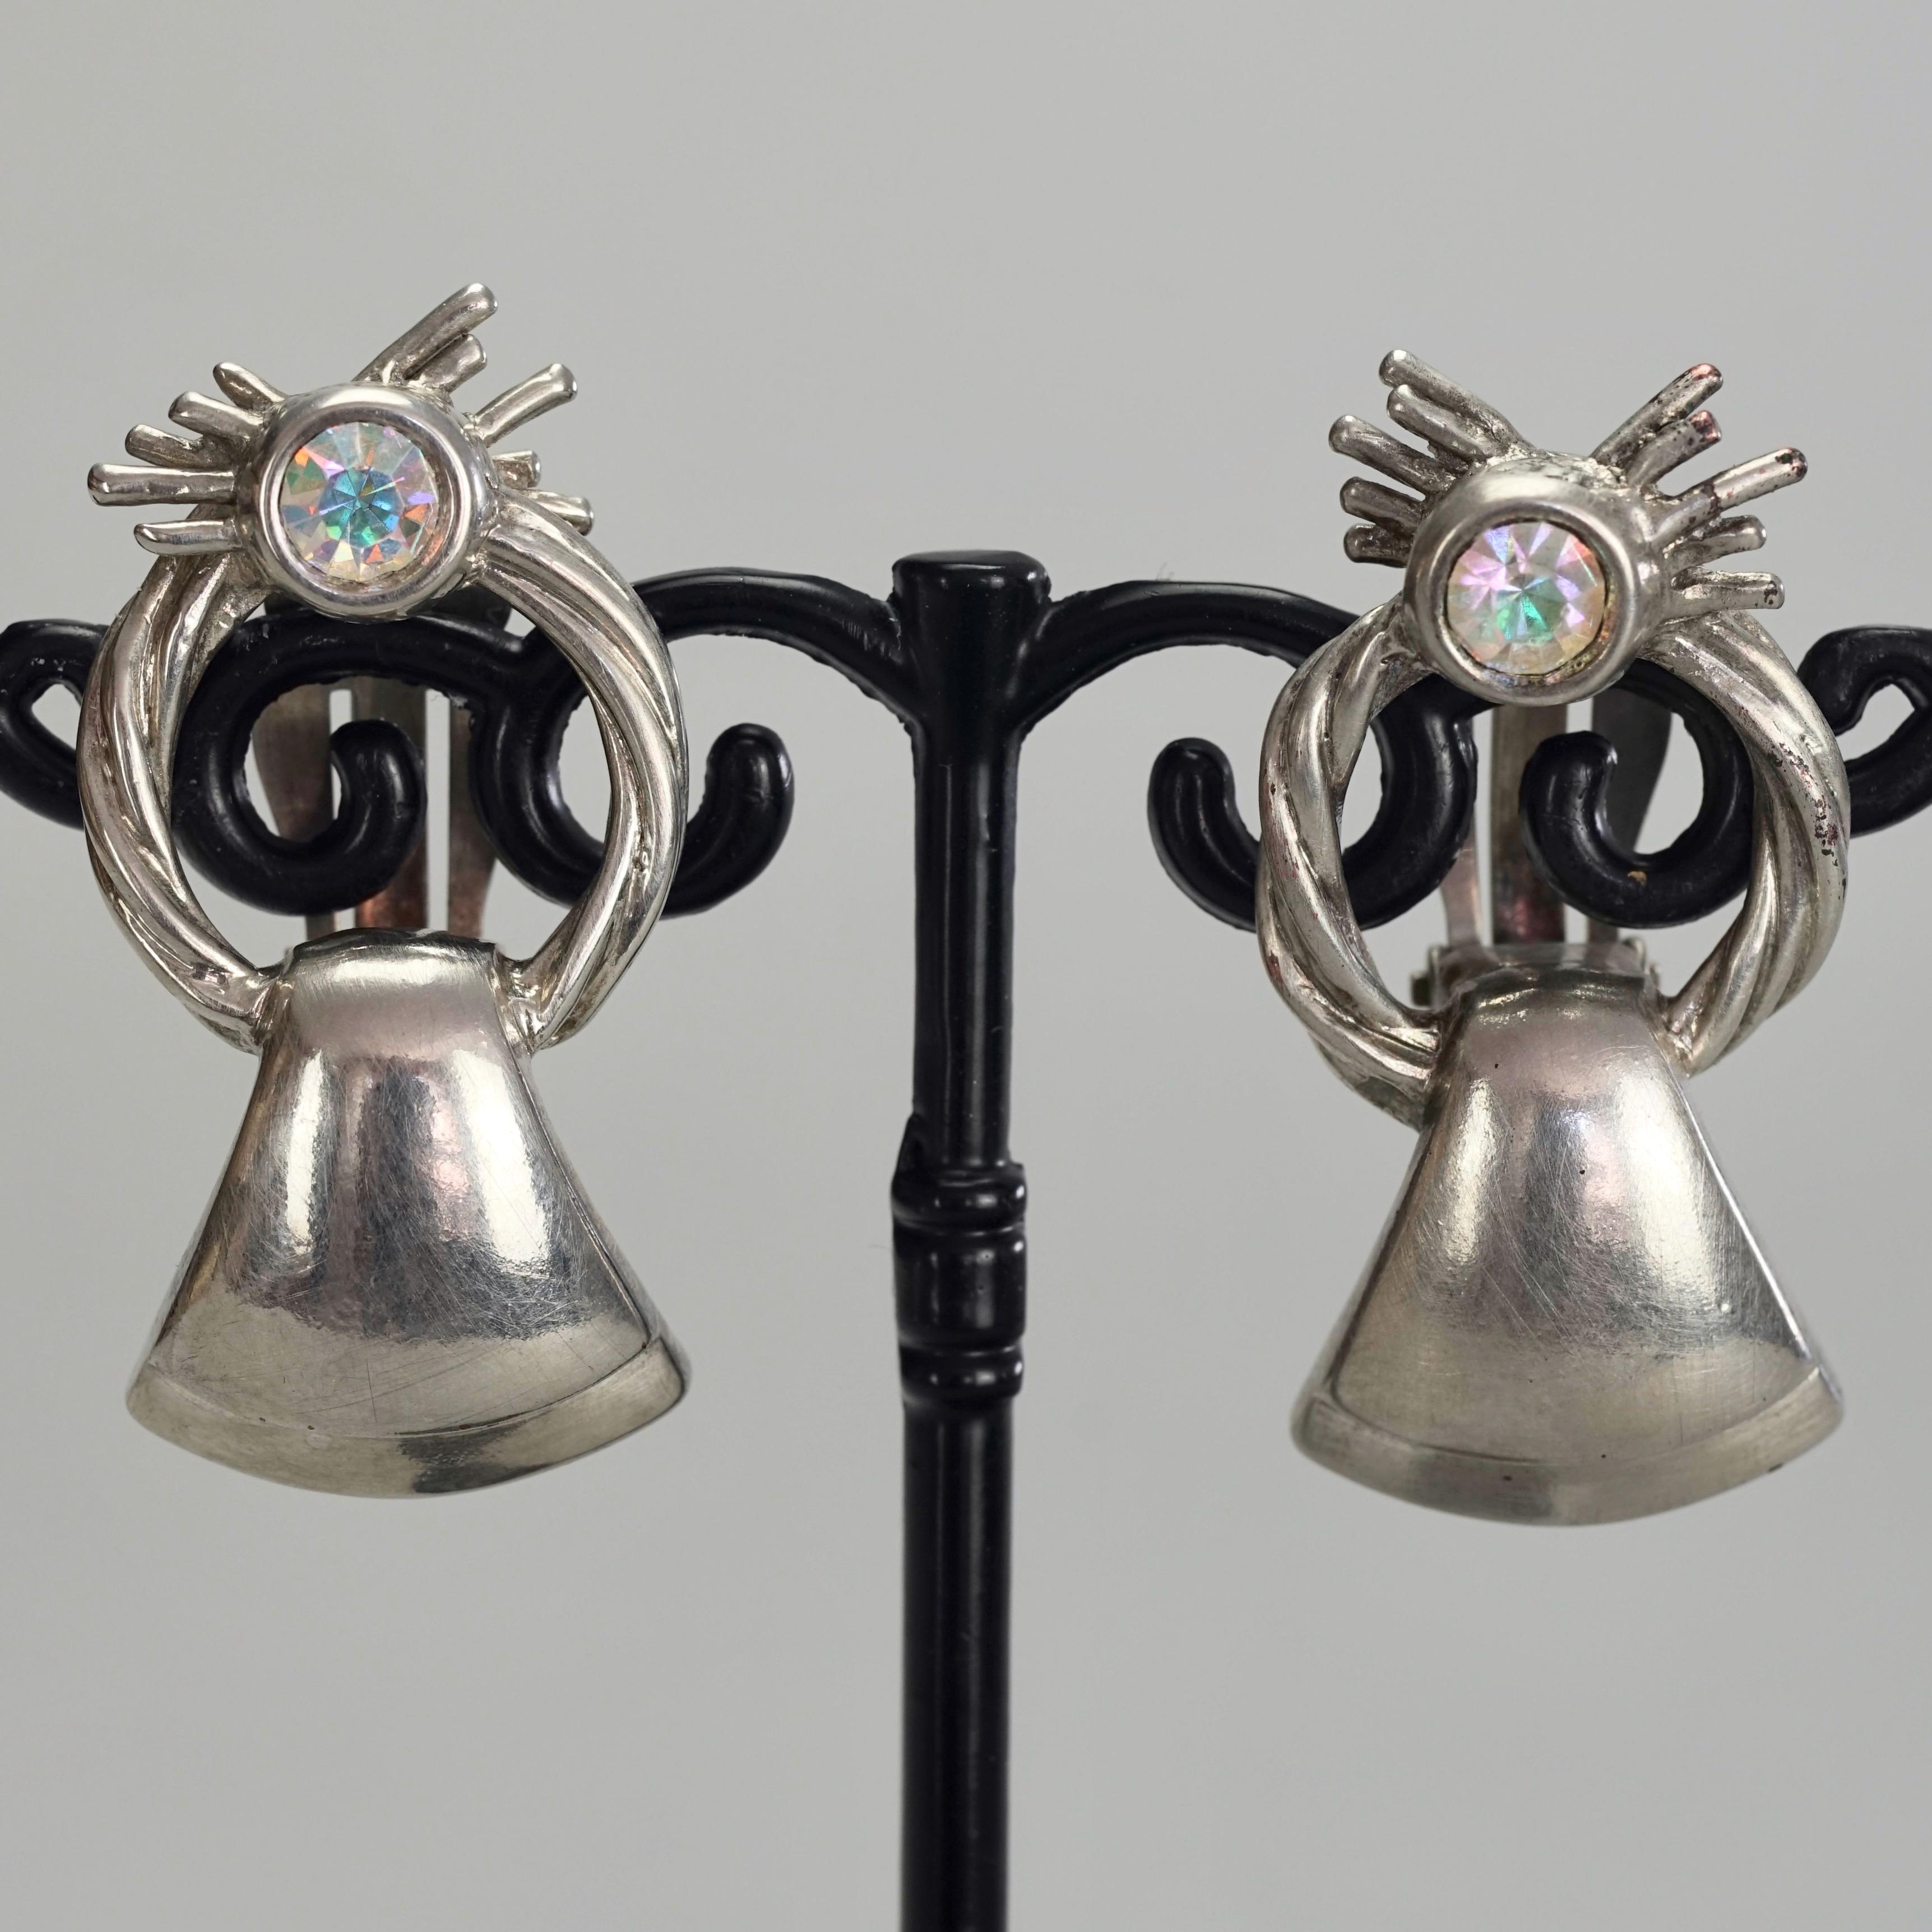 Vintage KARL LAGERFELD Door Knocker Silver Earrings

Measurements:
Height: 1.57 inches (4 cm)
Width: 0.78 inch (2 cm)
Weight per Earring: 14 grams

Features:
- 100% Authentic KARL LAGERFELD.
- Door knocker earrings with rhinestone embellishment.
-